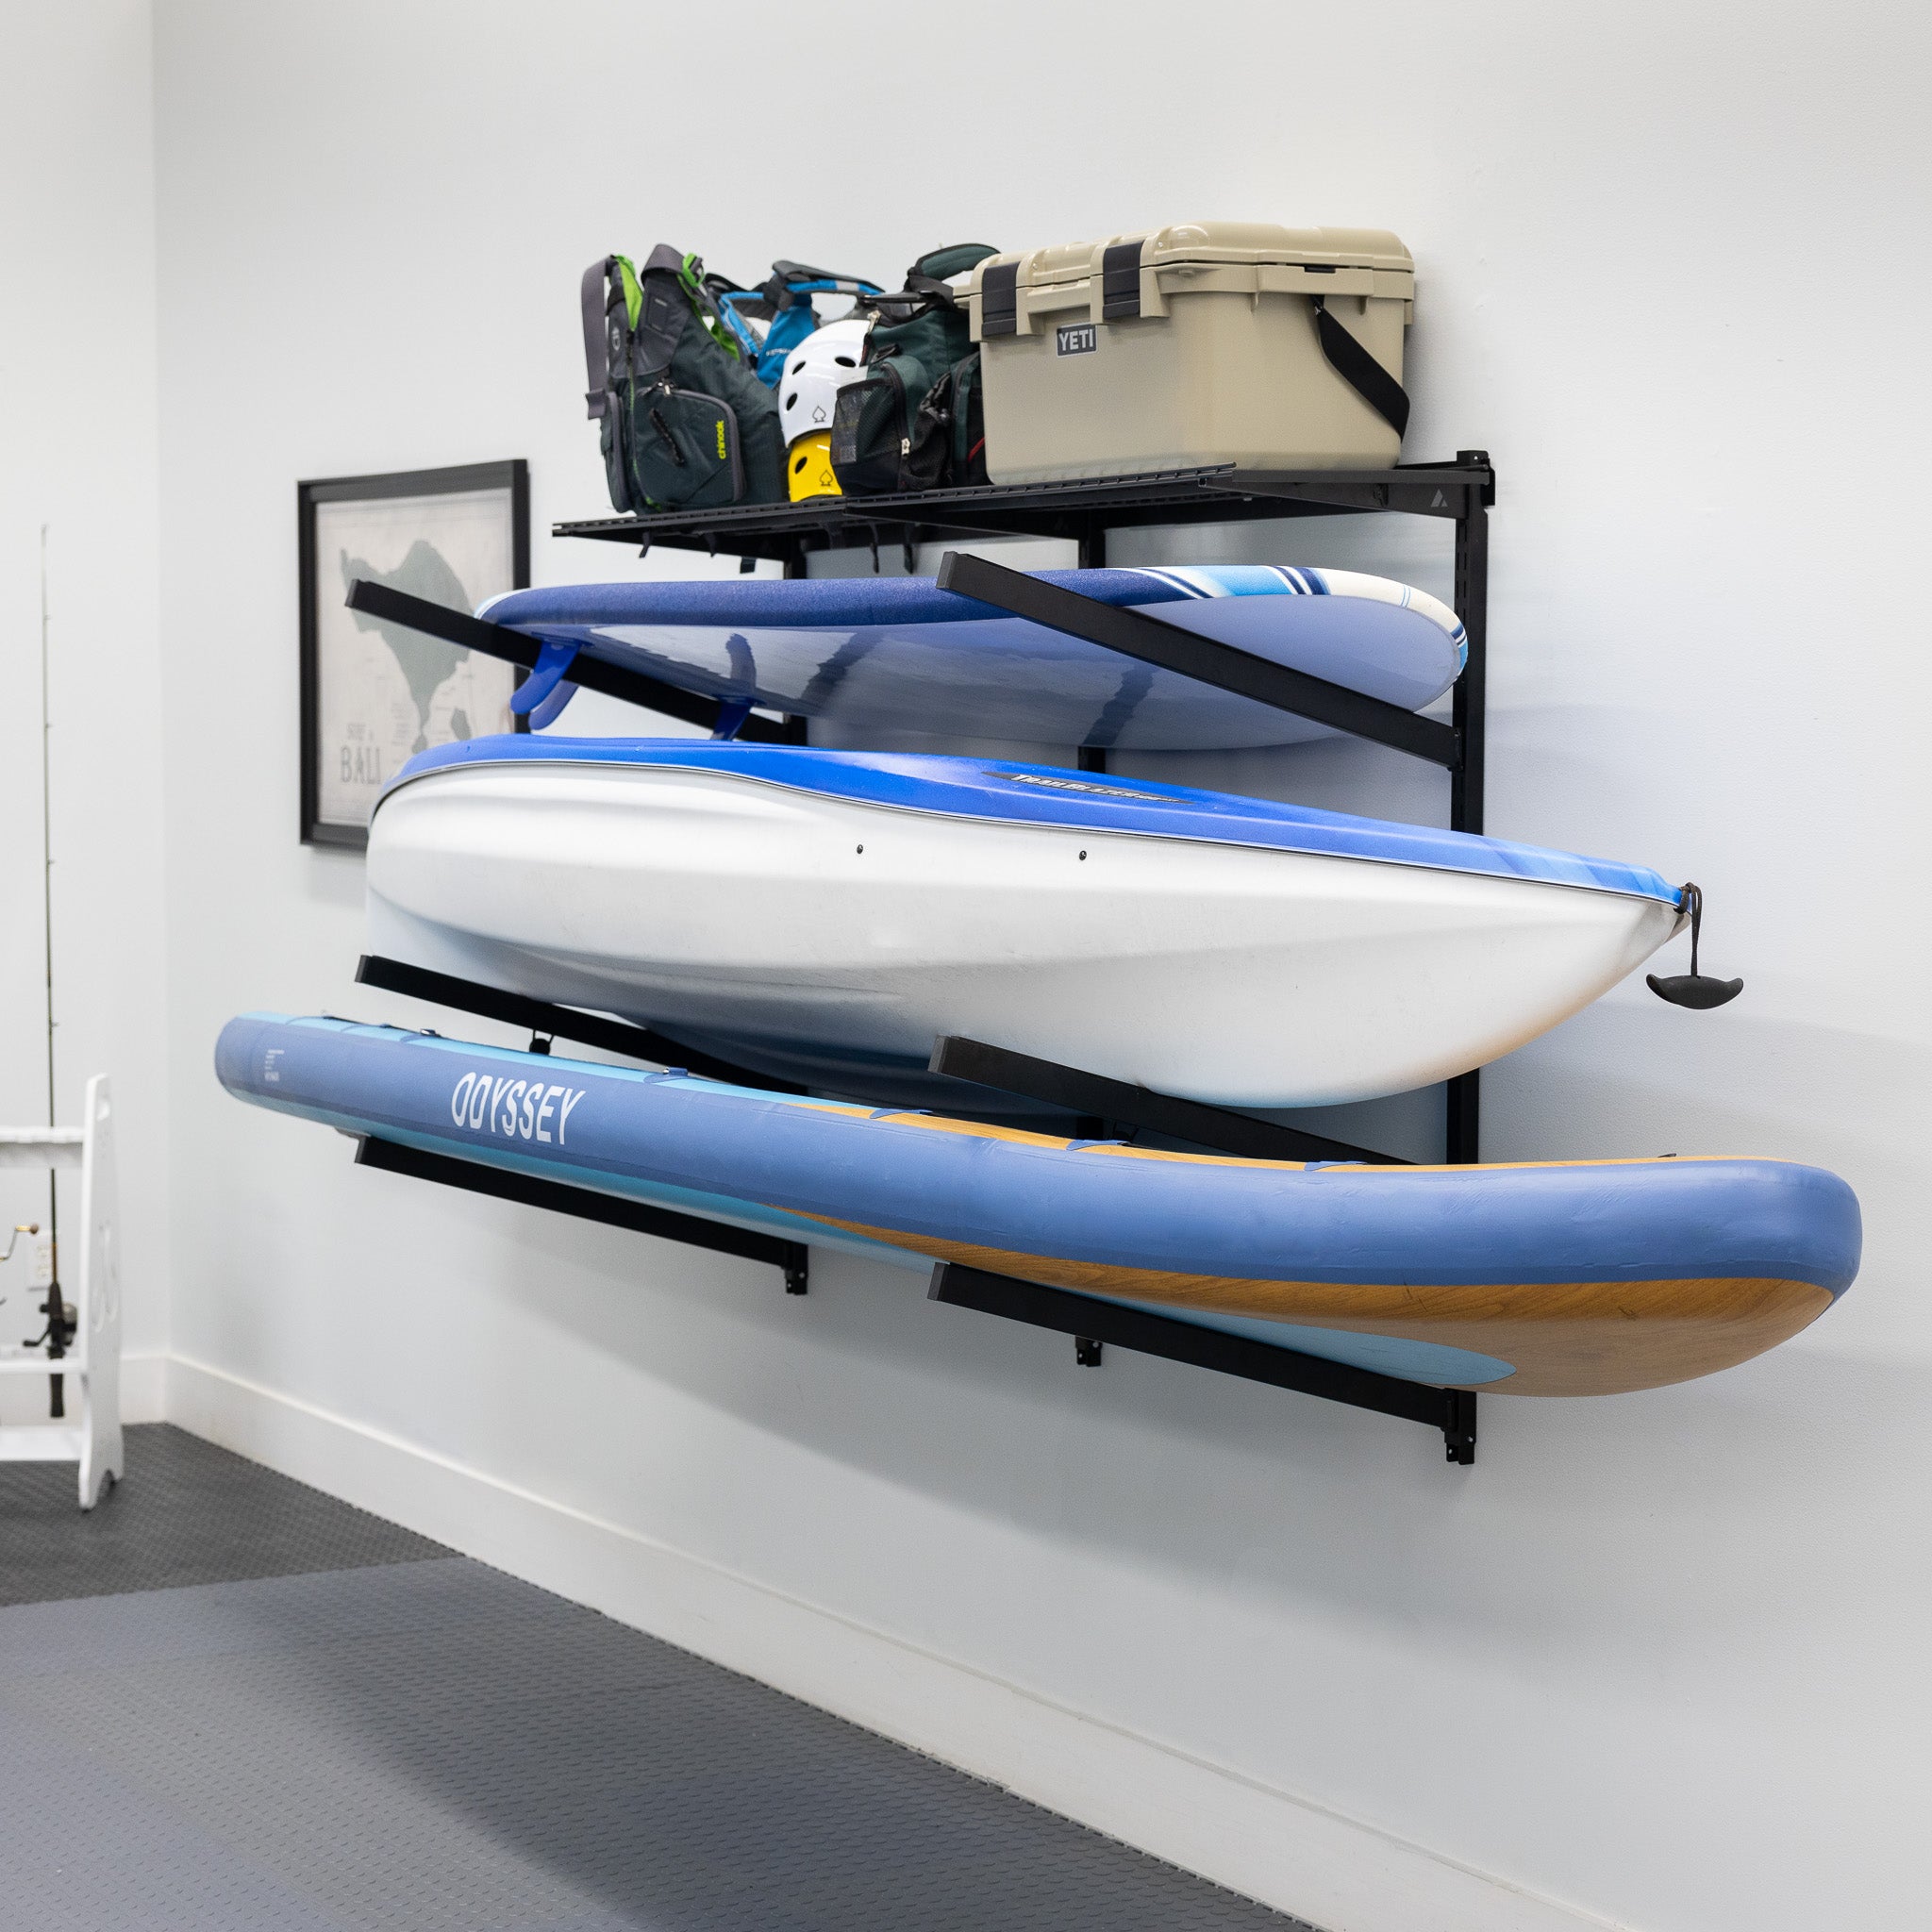 Teal Triangle G-Watersport Pro | Wall Storage System